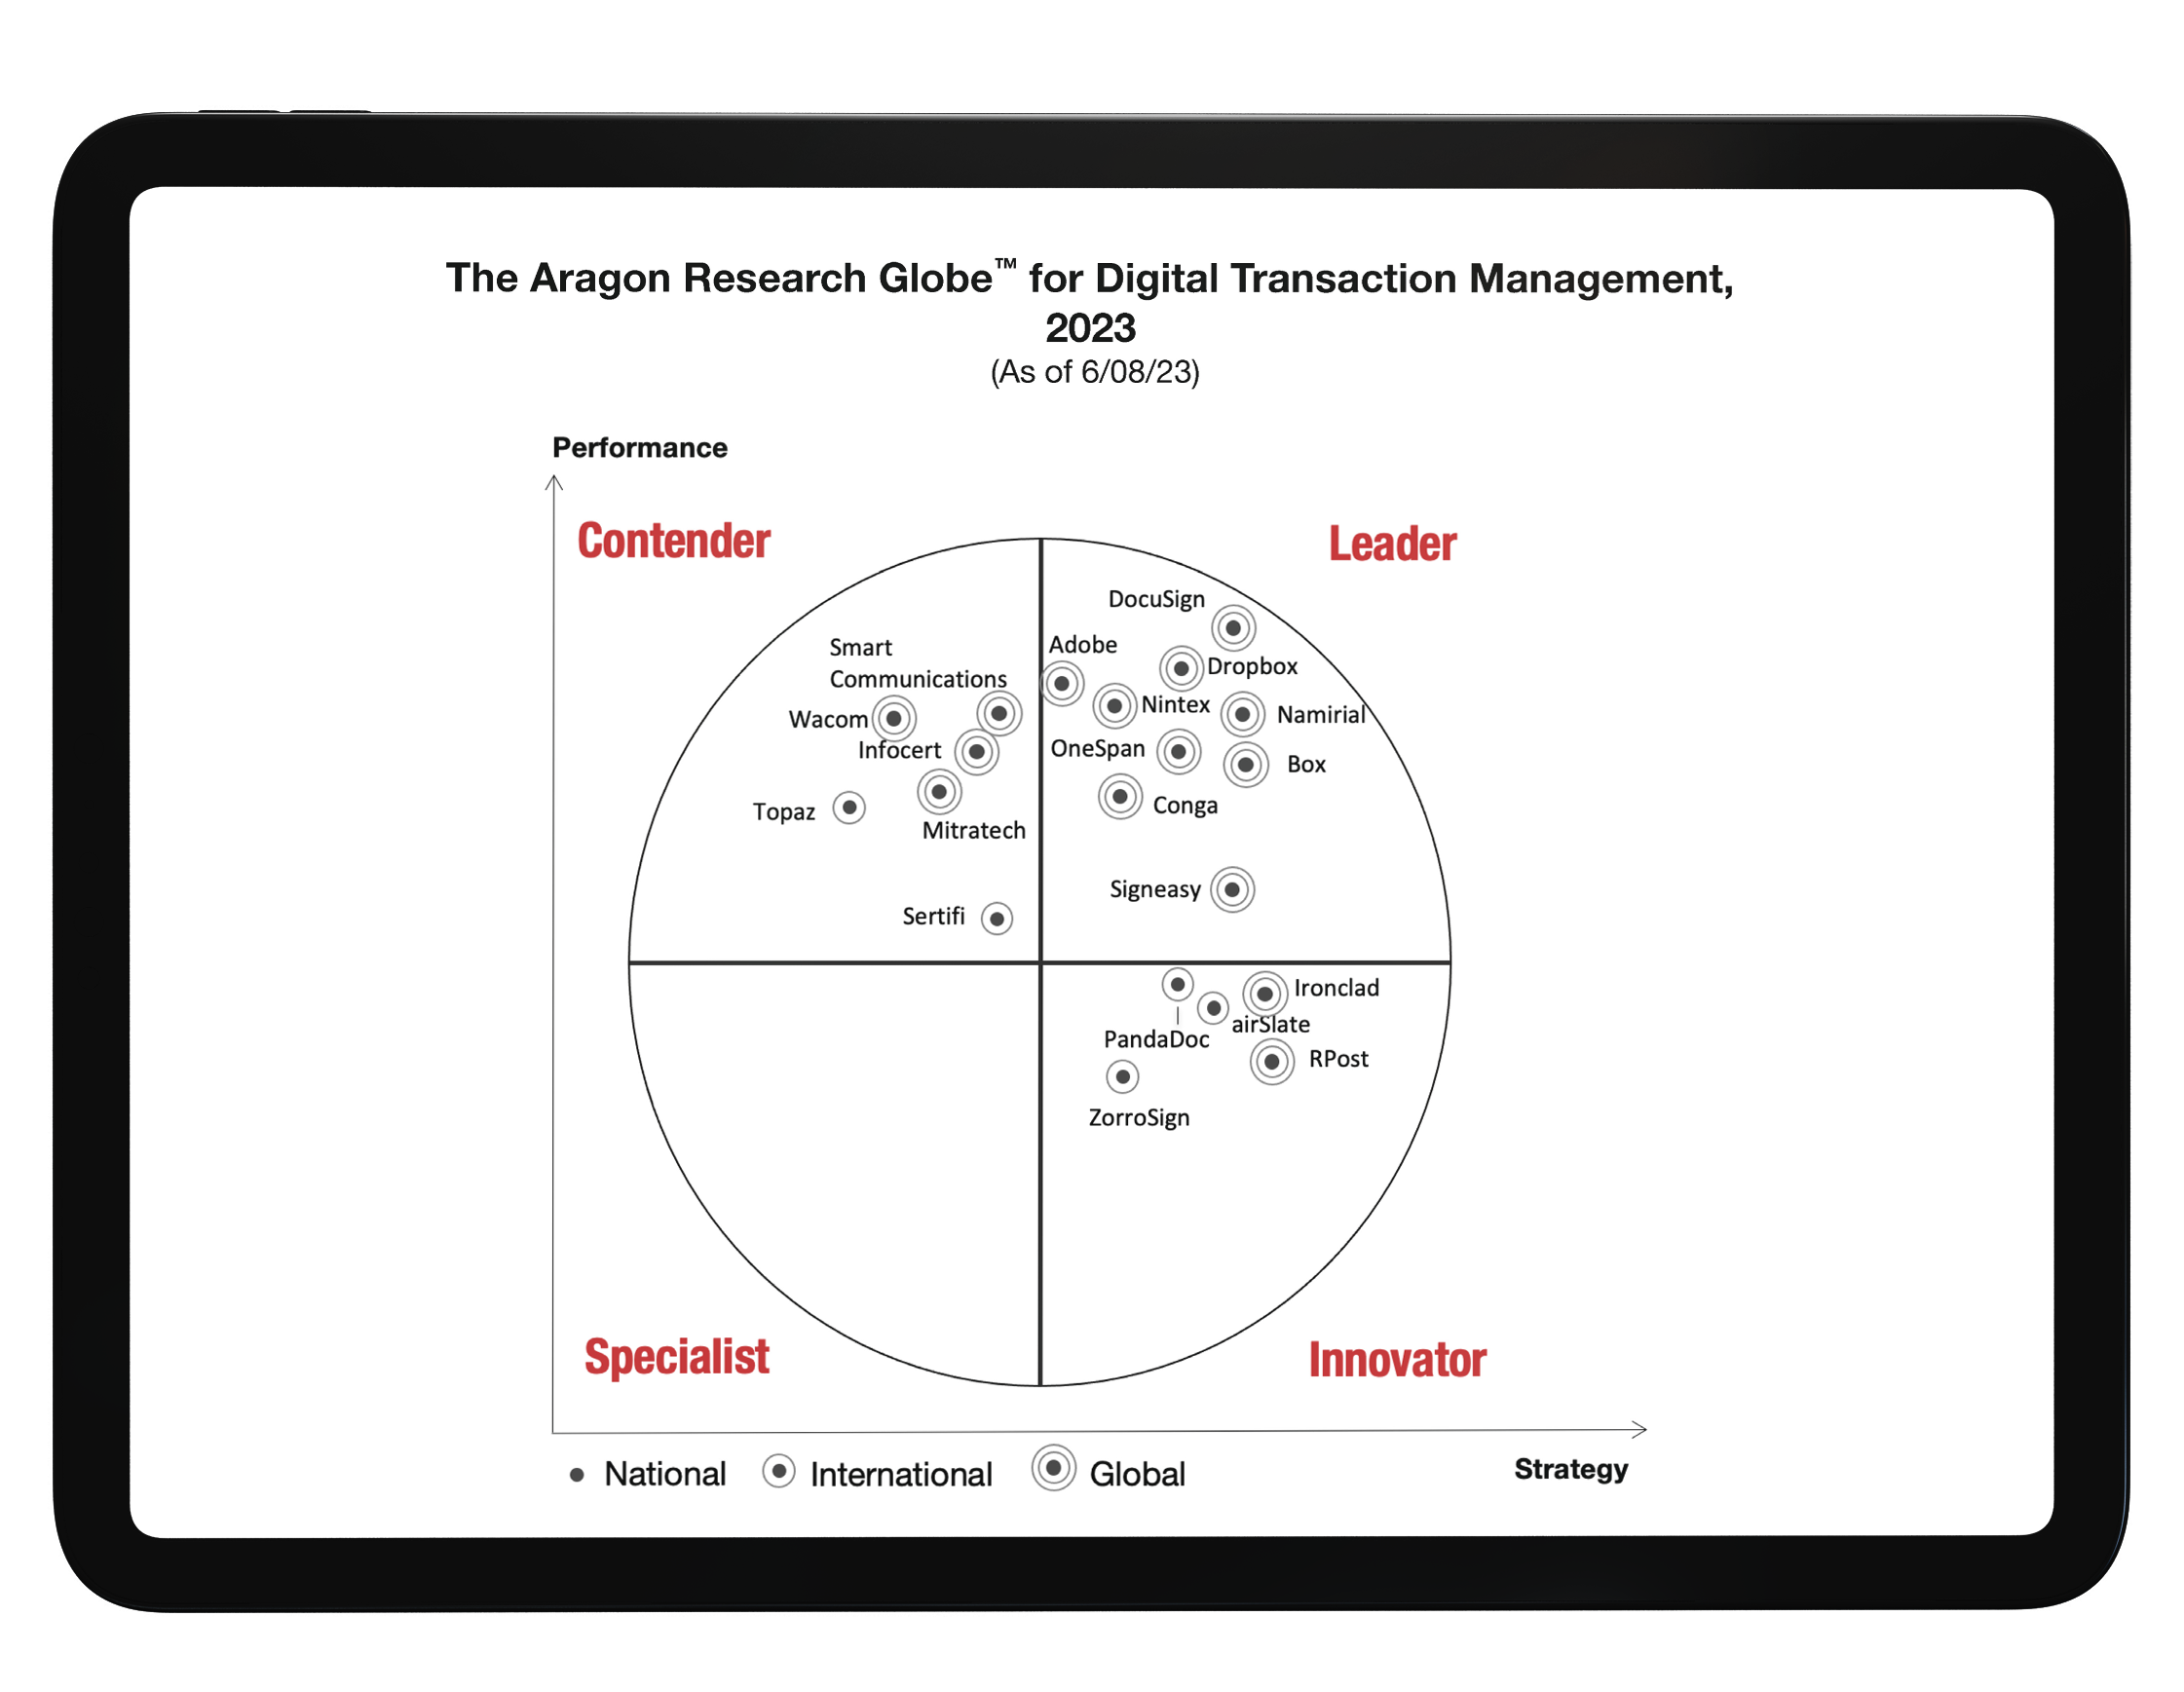 OneSpan a Leader in Aragon Research Globe for Digital Transaction Management 